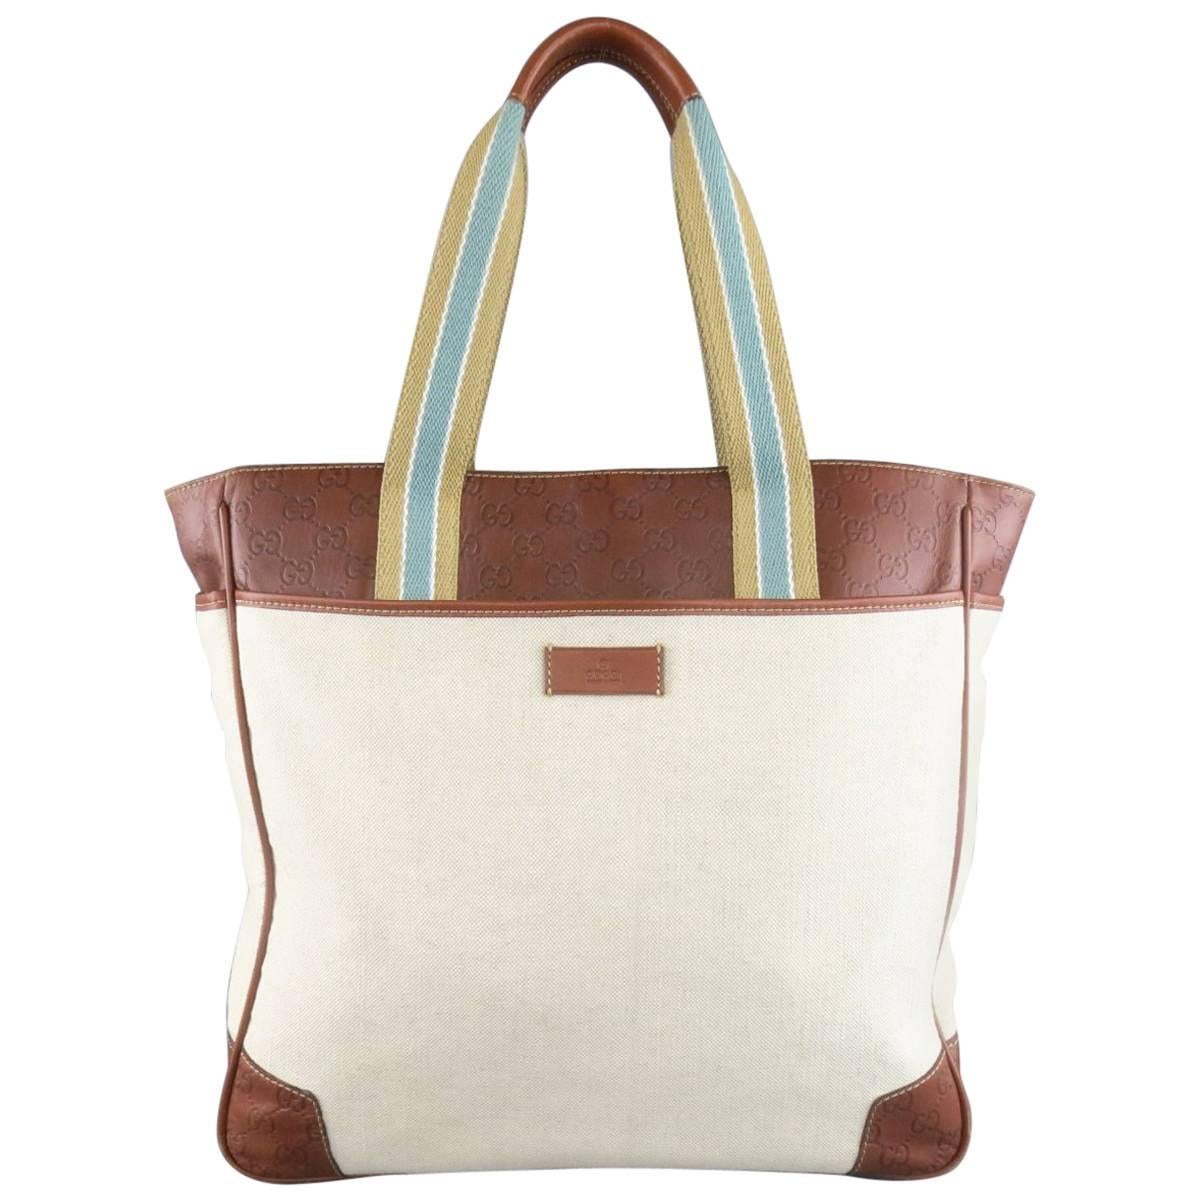 GUCCI Beige Canvas & Guccissima Embossed Leather Tote Bag